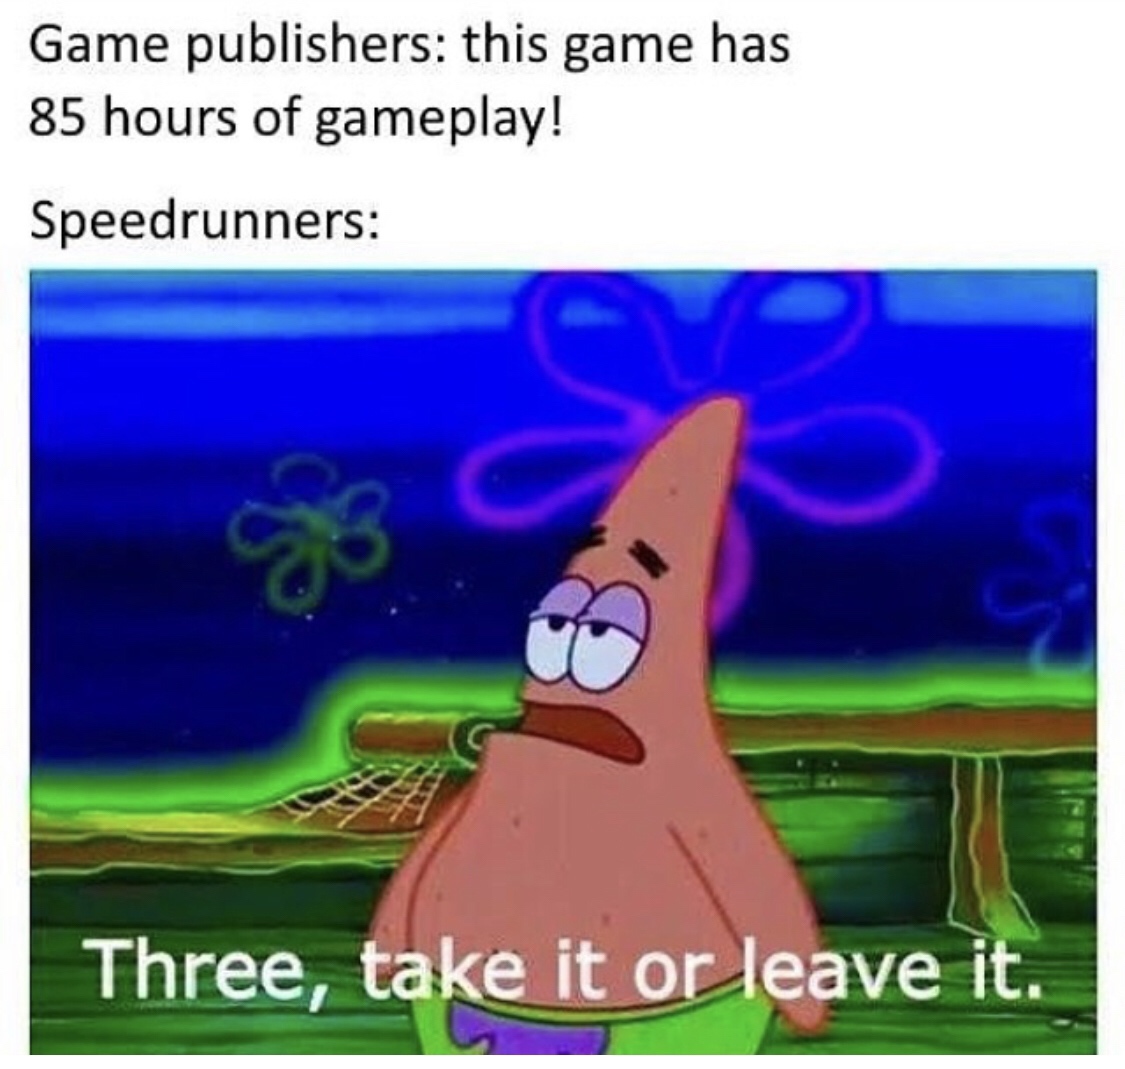 3 take it or leave it meme - Game publishers this game has 85 hours of gameplay! Speedrunners Three, take it or leave it.